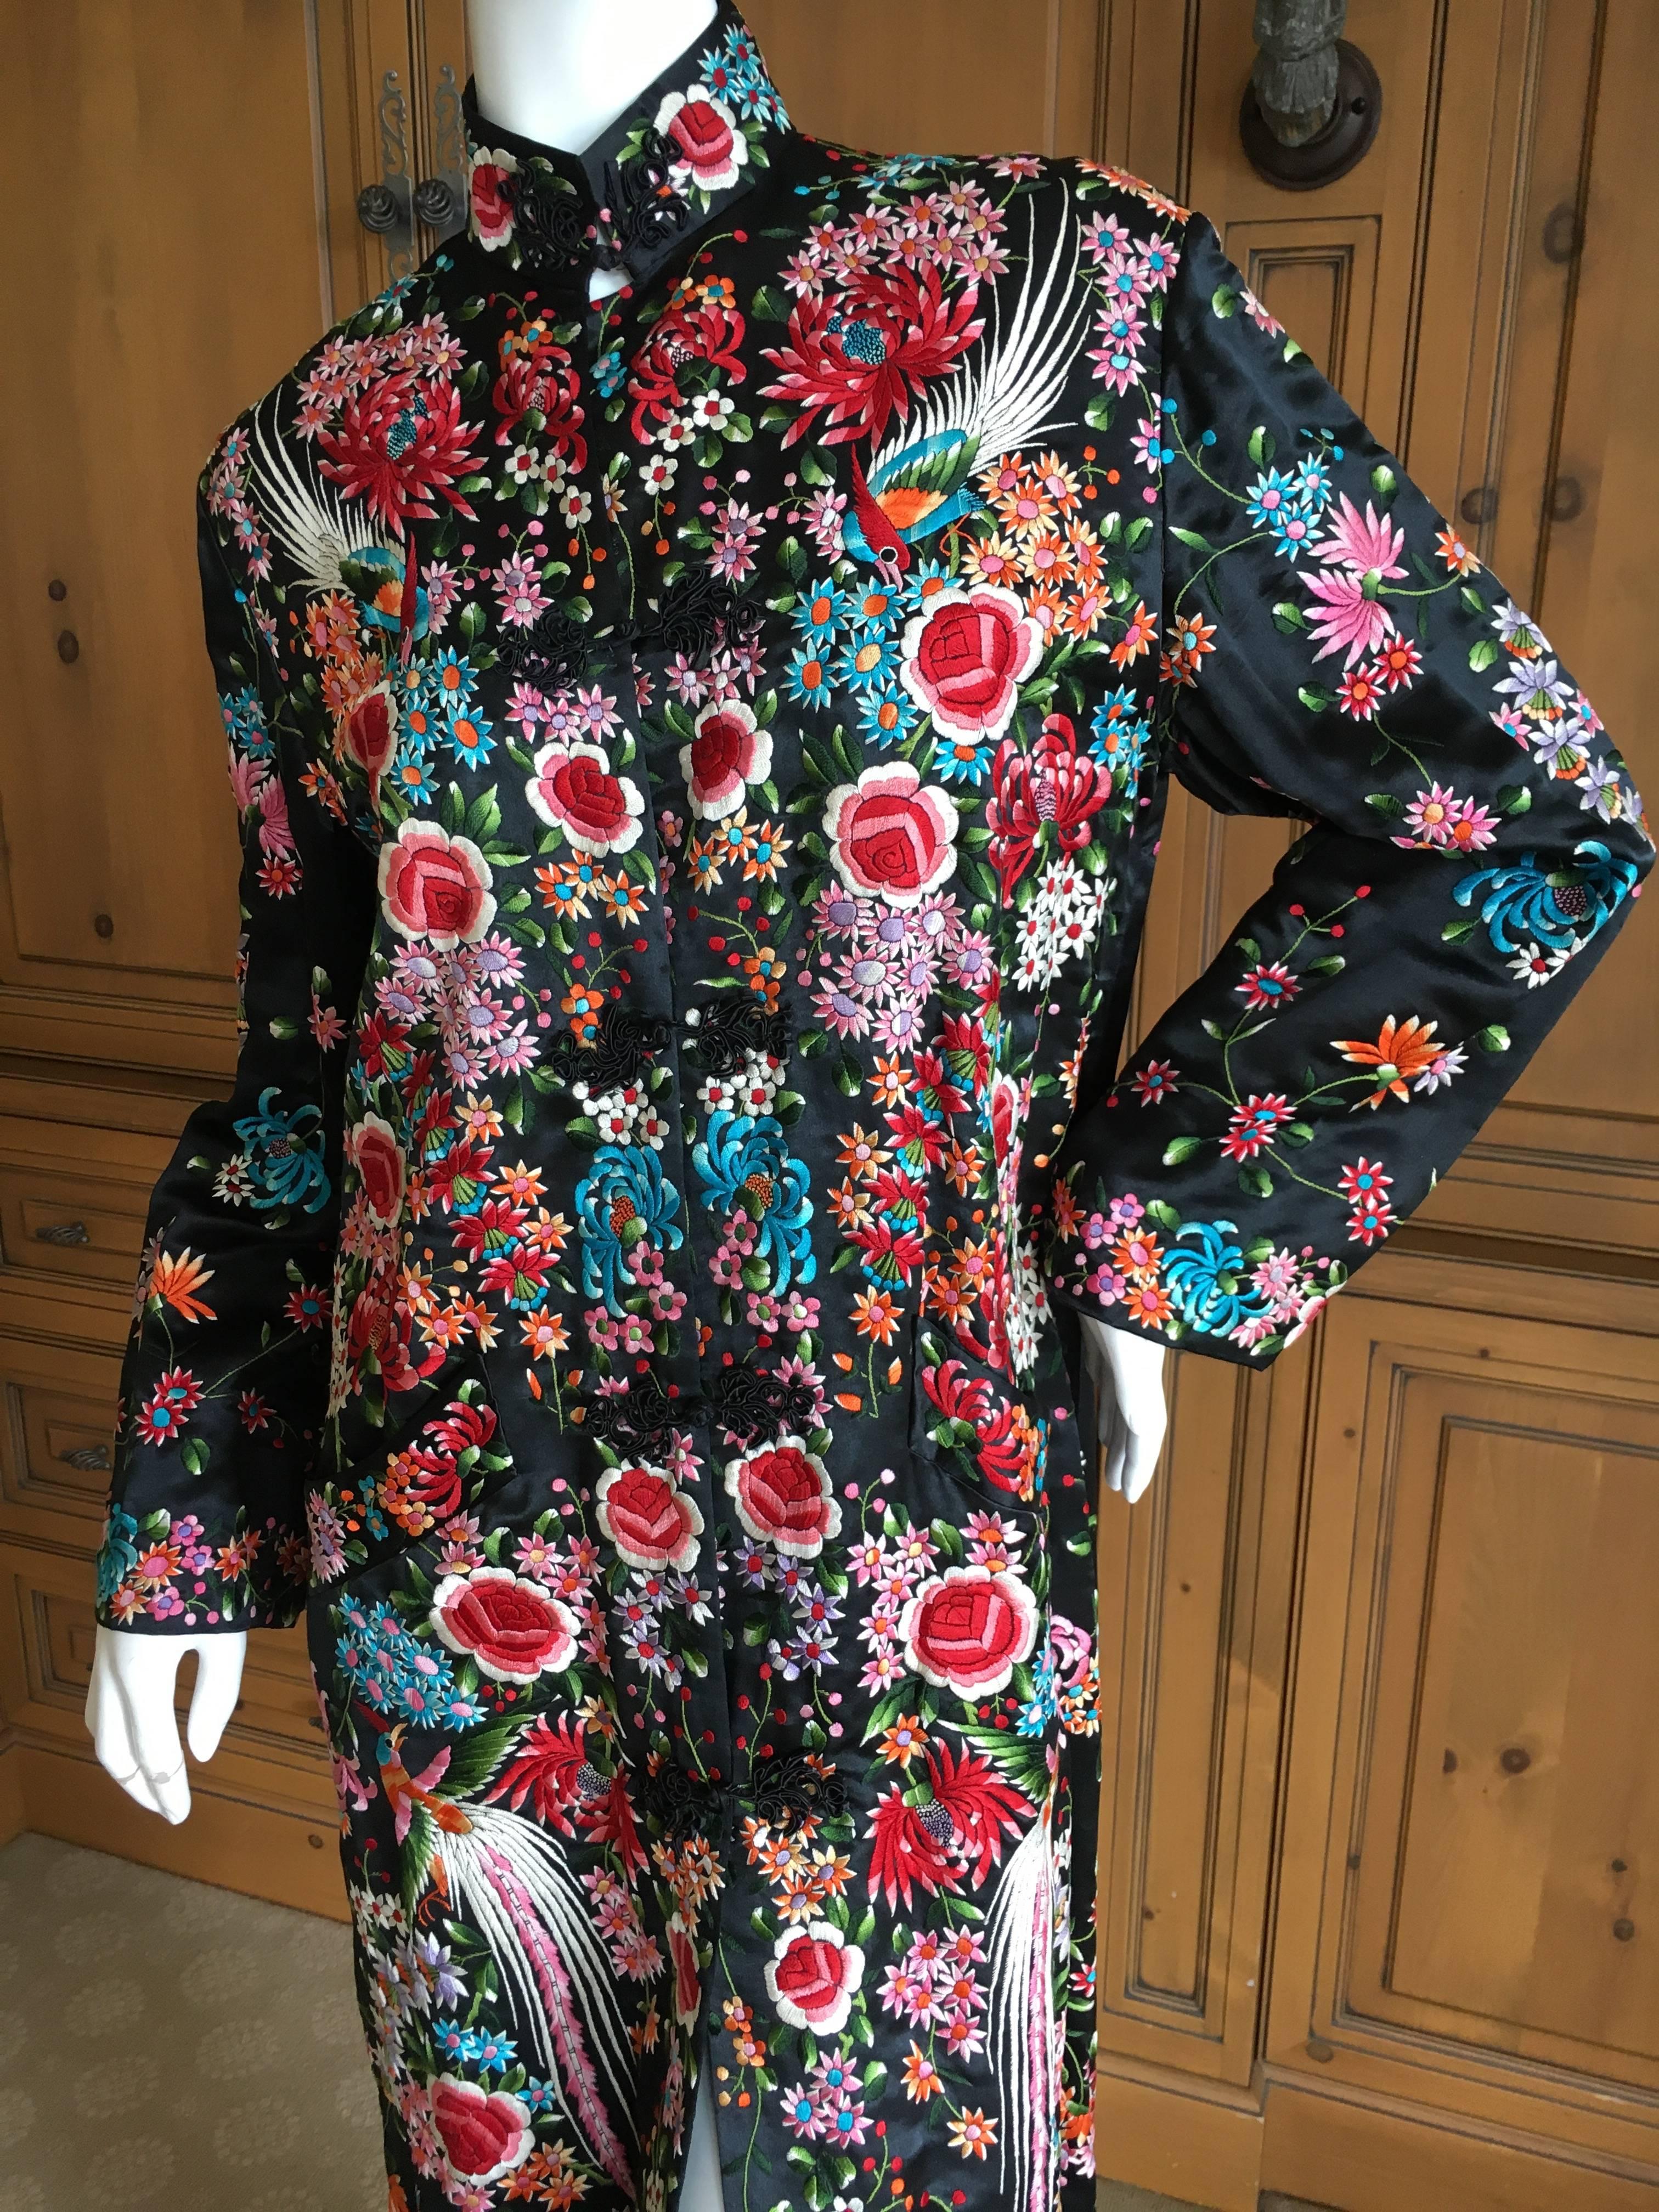 1920's Asian Exquisite Embroidered Evening Coat with Chrysanthemum and Birds. Frog button closures.
Peonies, Chrysanthemums, and Pheasants adorn this beautiful evening coat.
In excellent condition
Bust 40"
Waist 36"
Length 46"